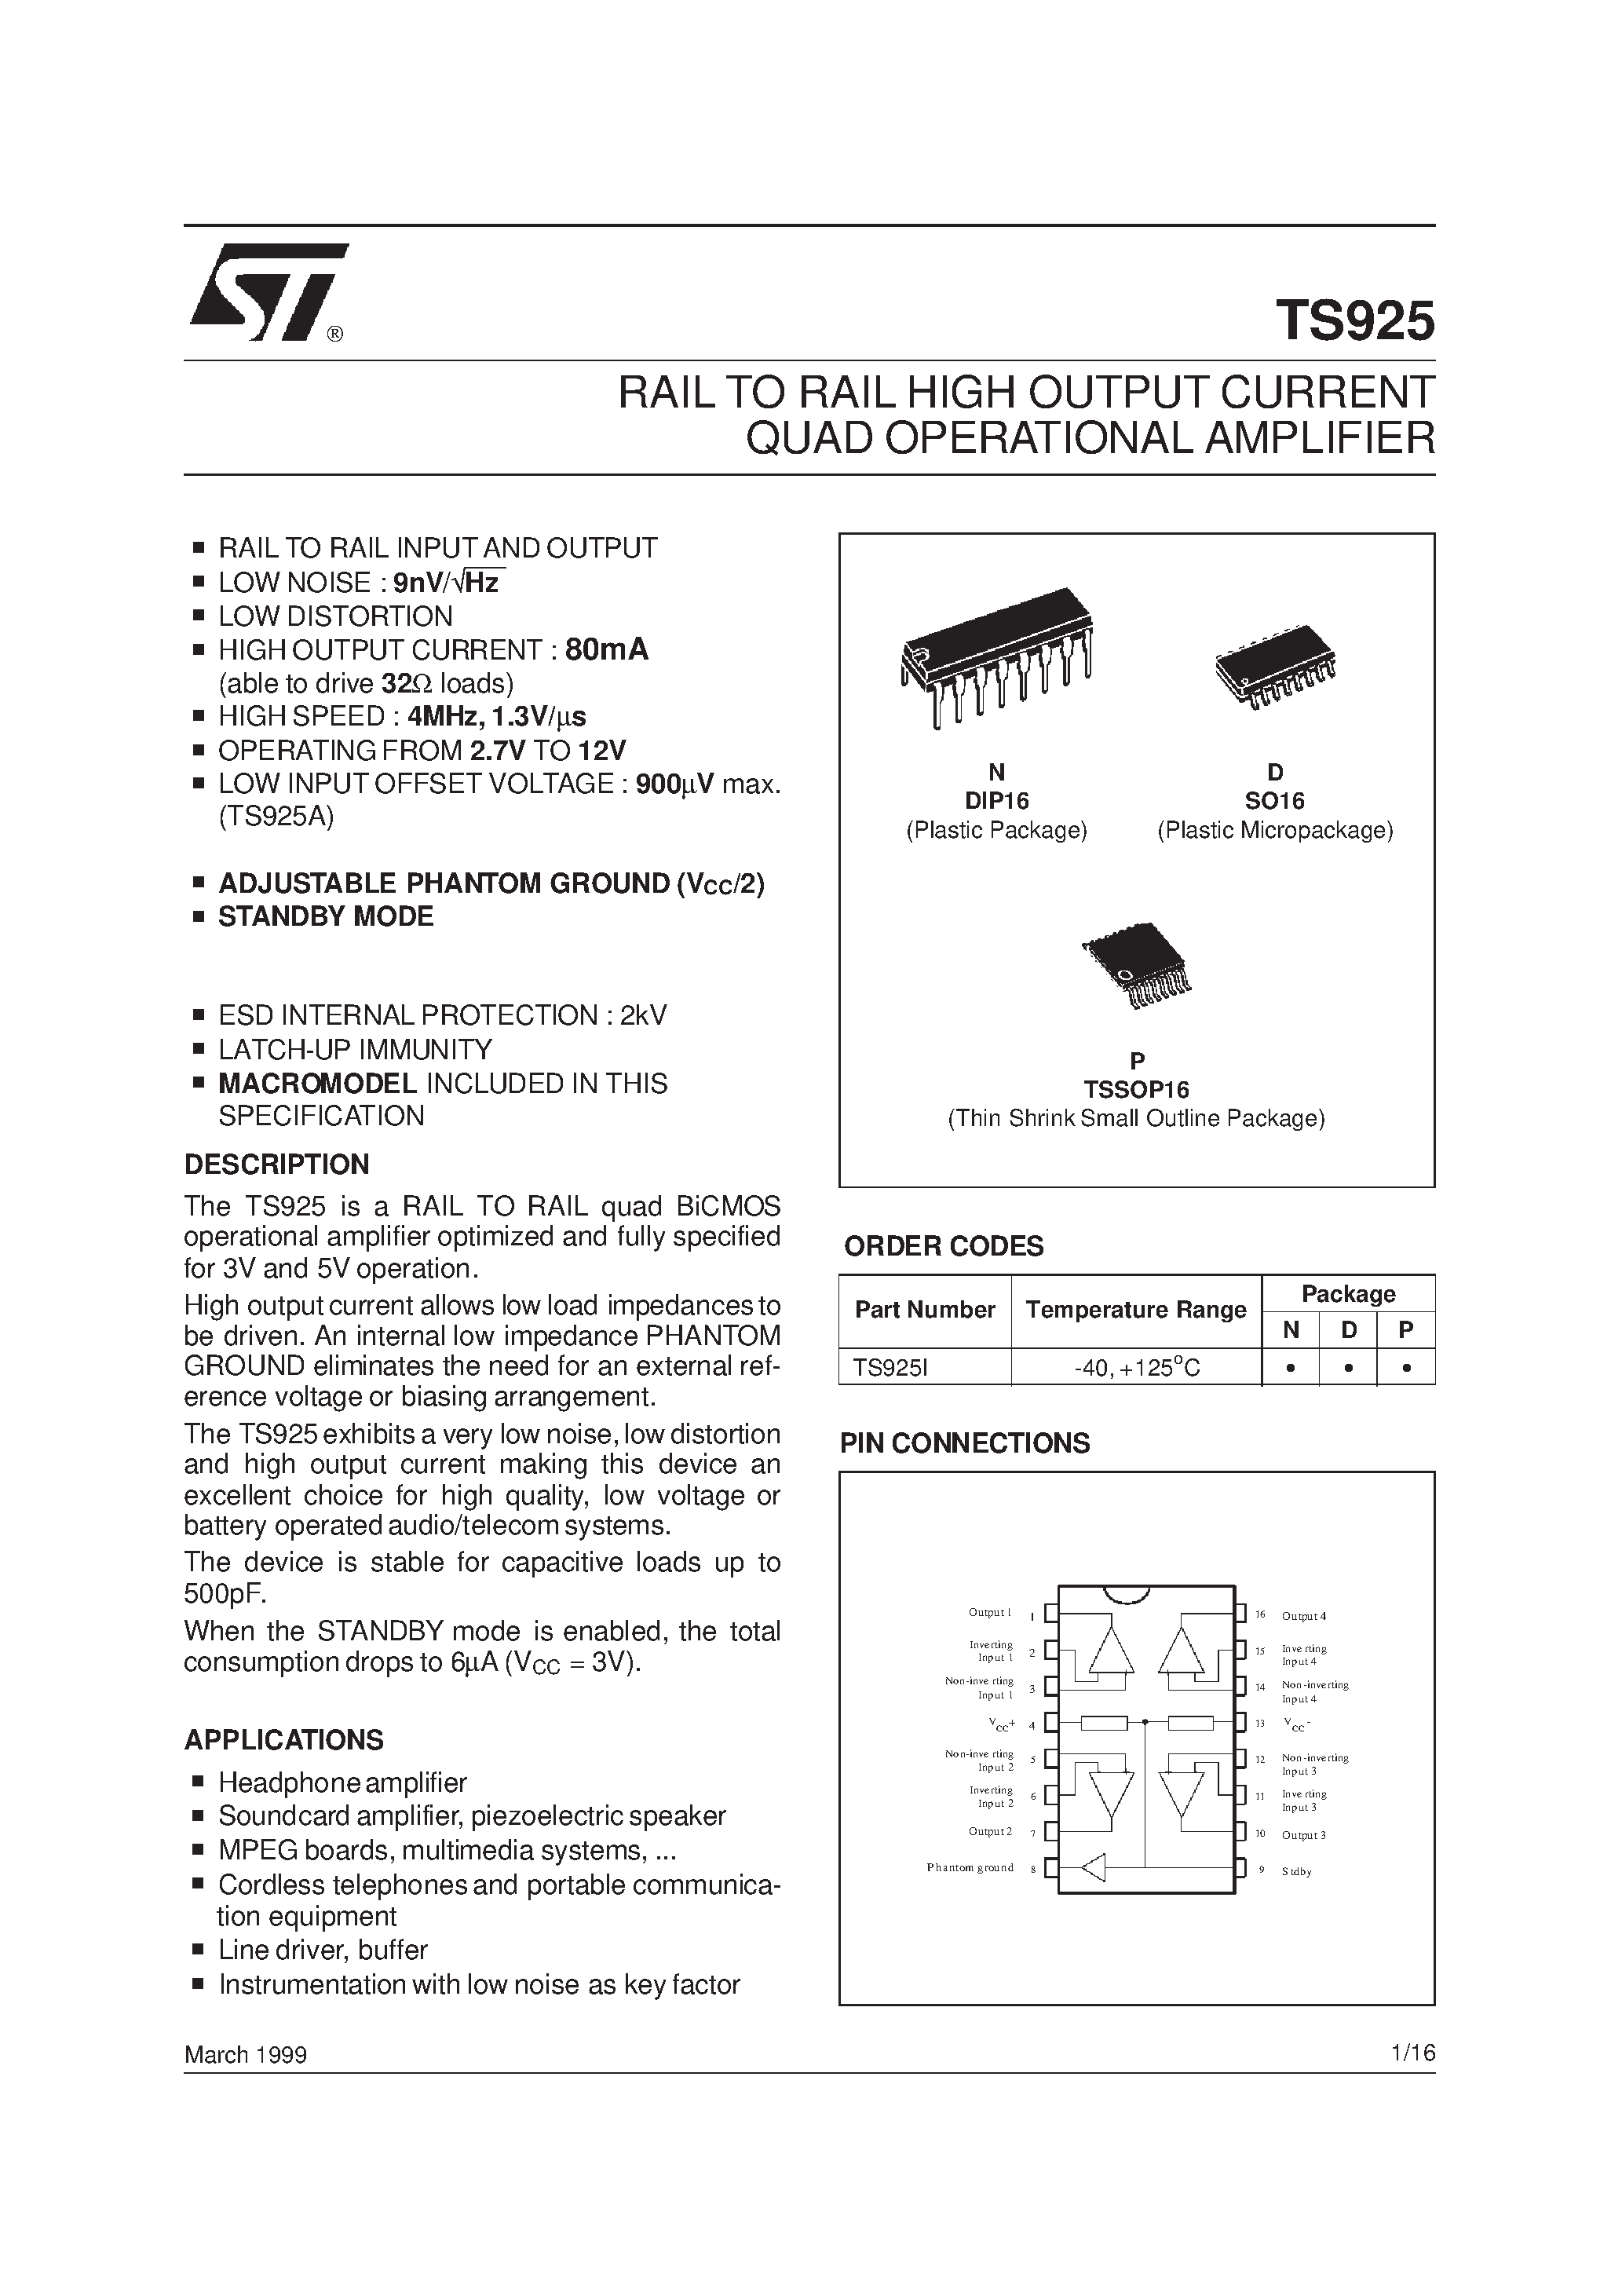 Datasheet TS925 - RAIL TO RAIL HIGH OUTPUT CURRENT QUAD OPERATIONAL AMPLIFIER page 1